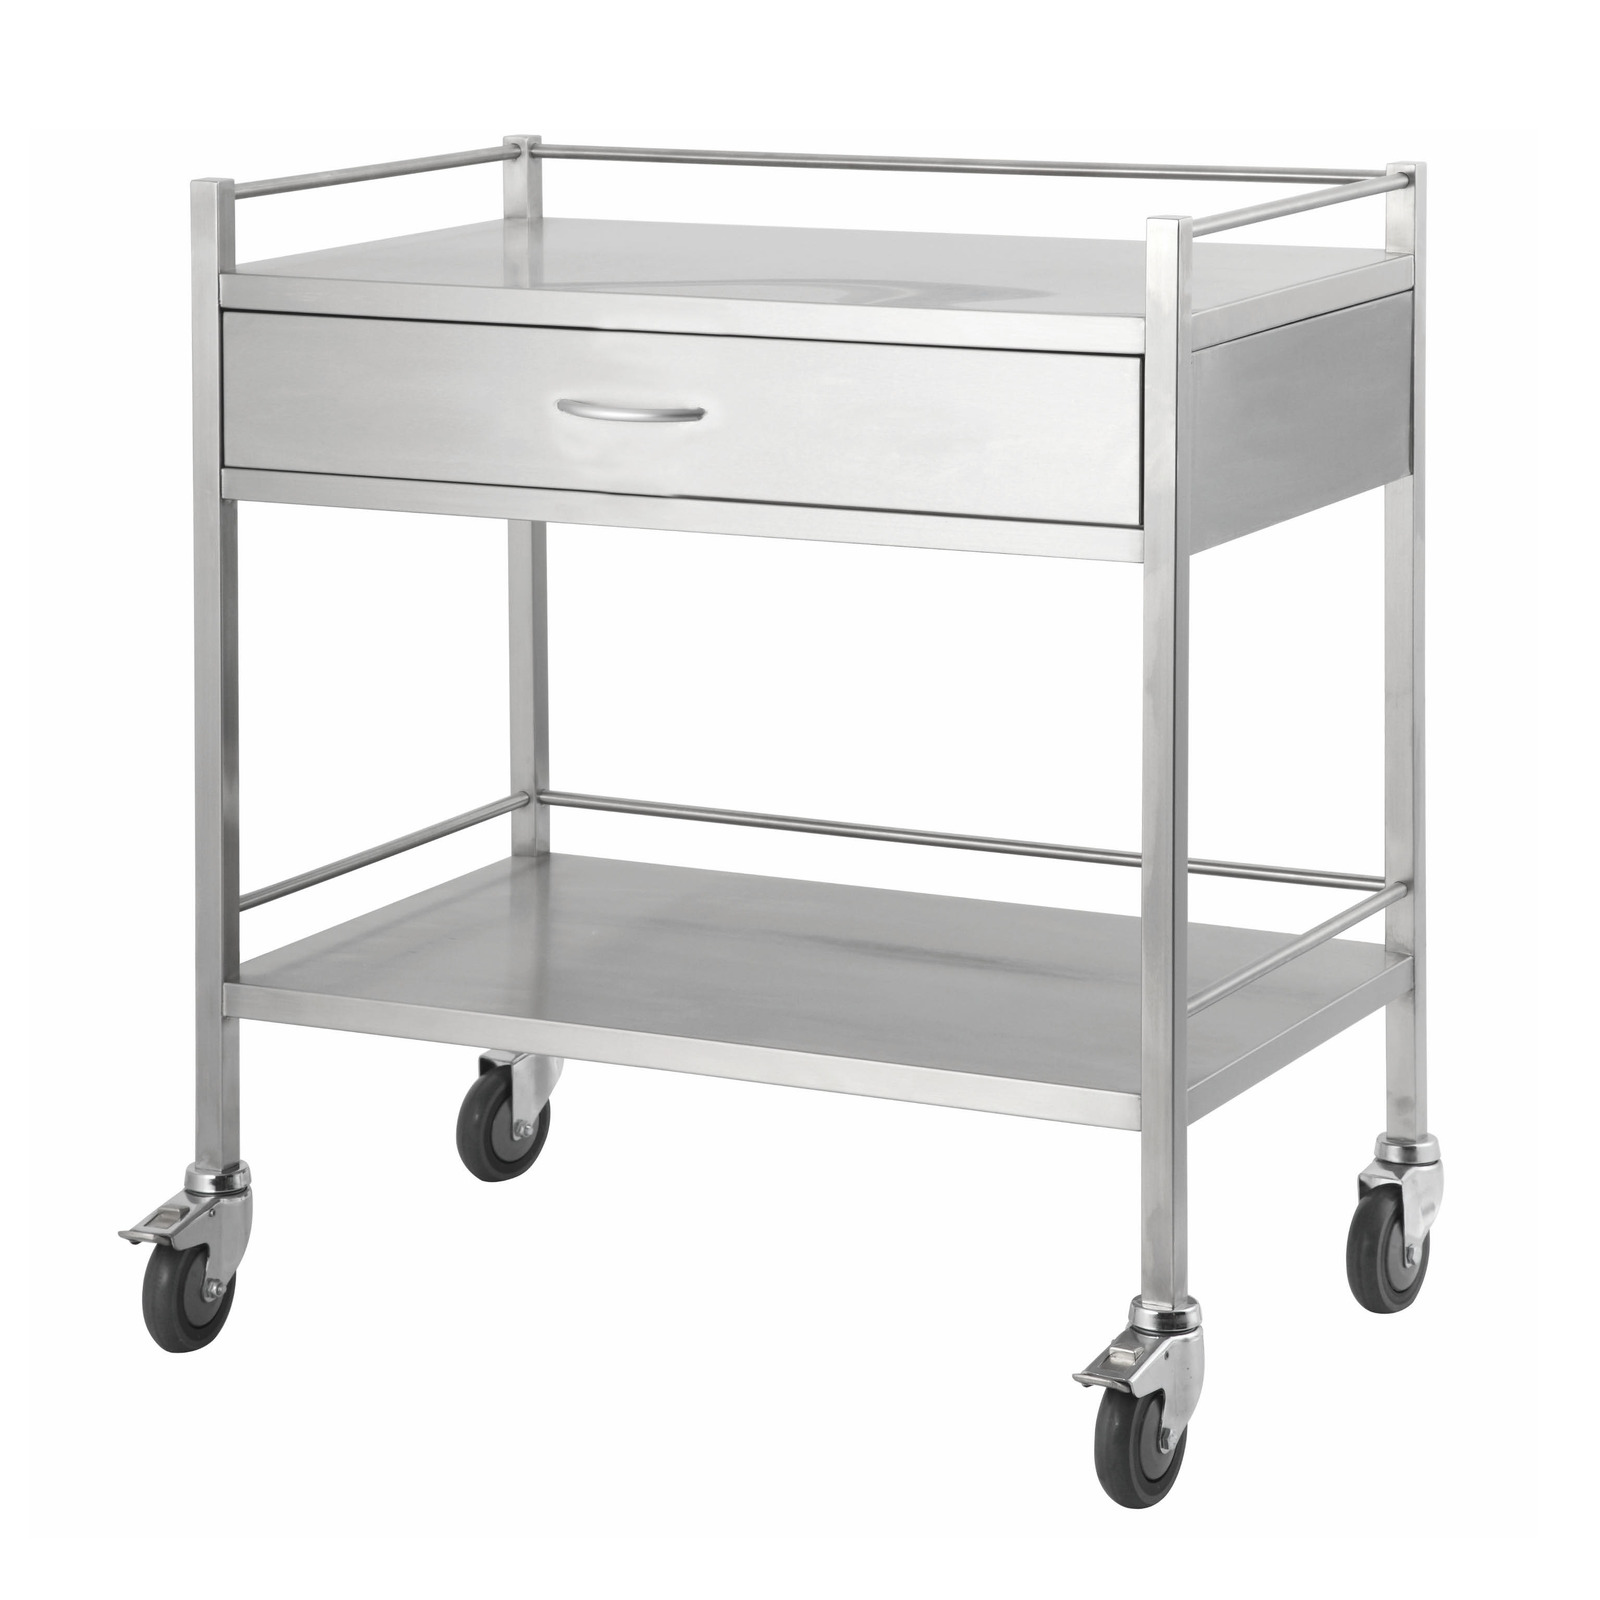 Double Stainless Steel Instrument Trolley (with 1 Drawer)